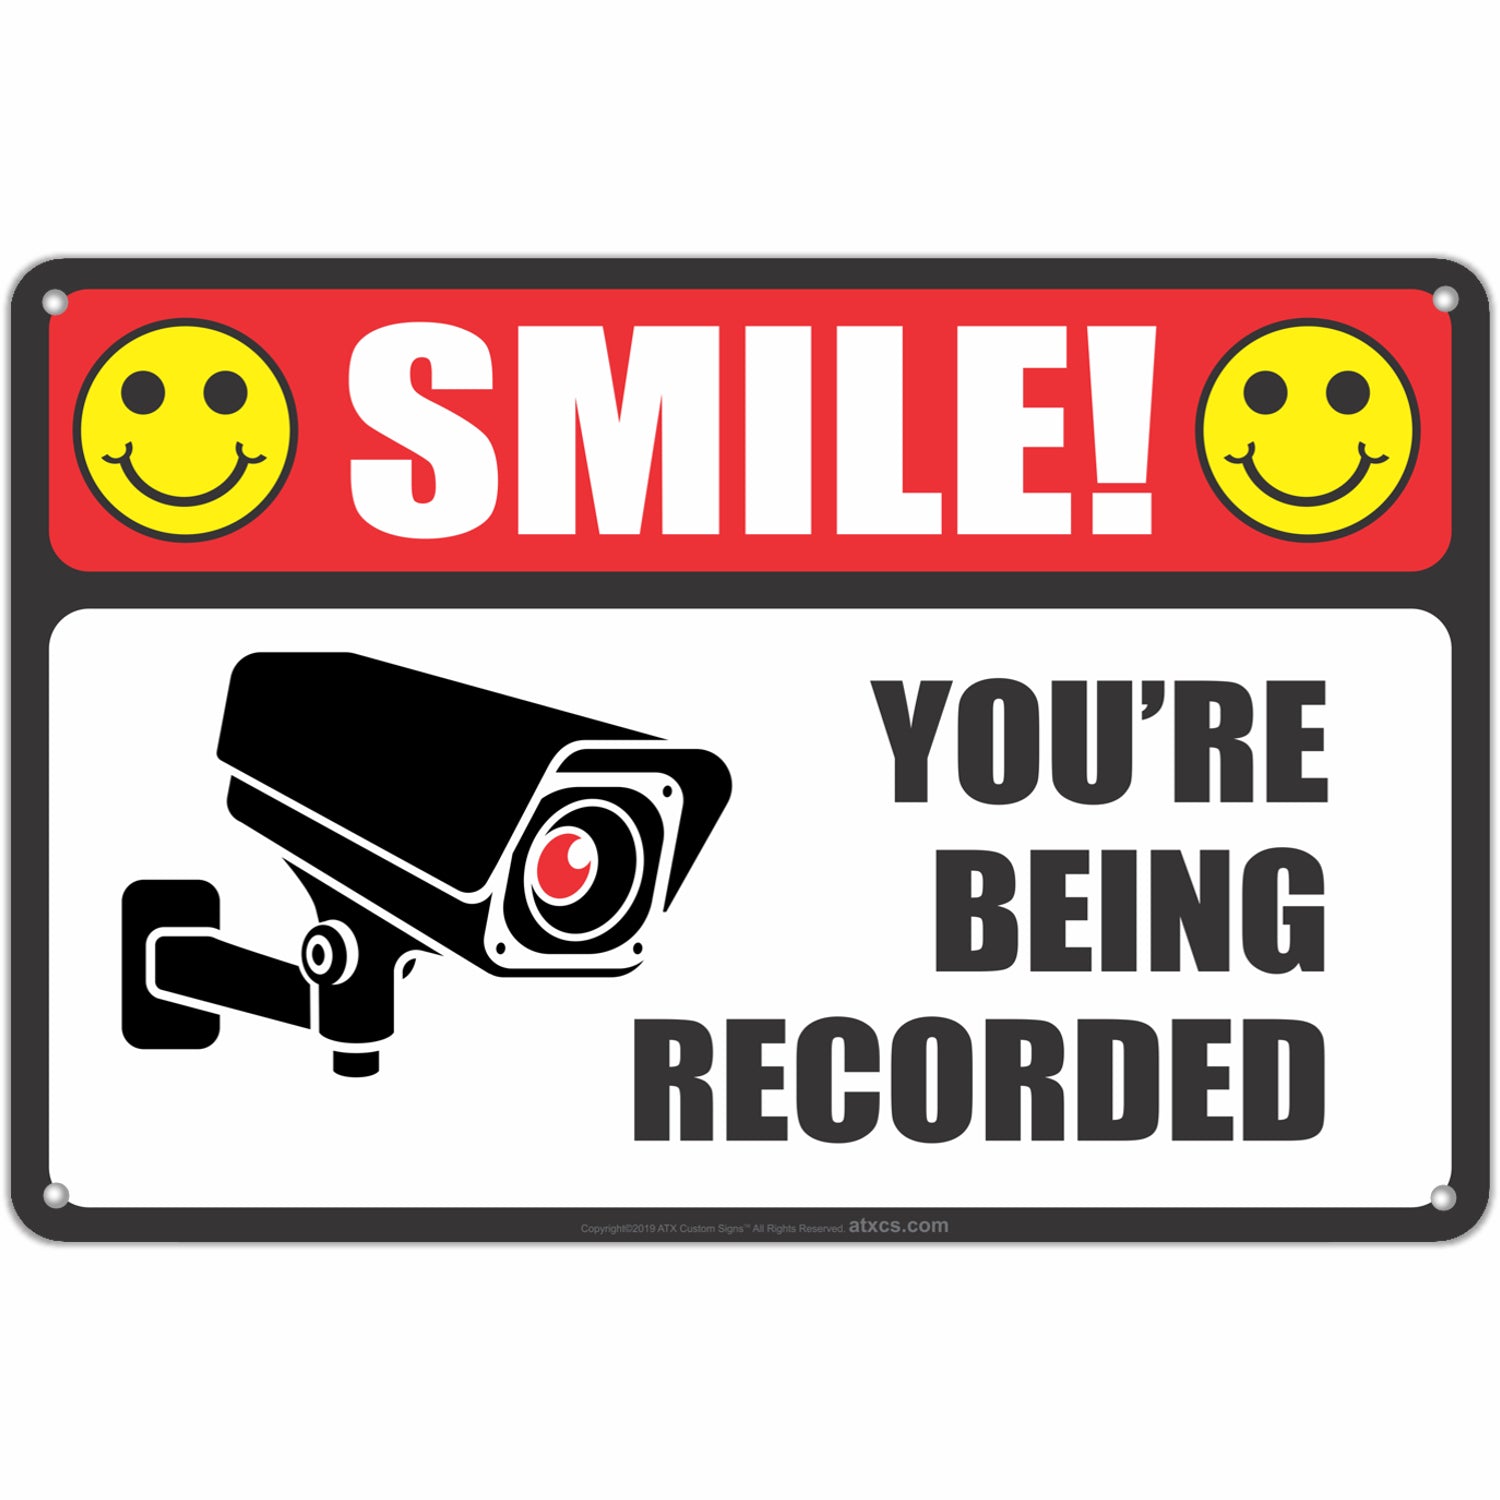 Smile You're Being Recorded.